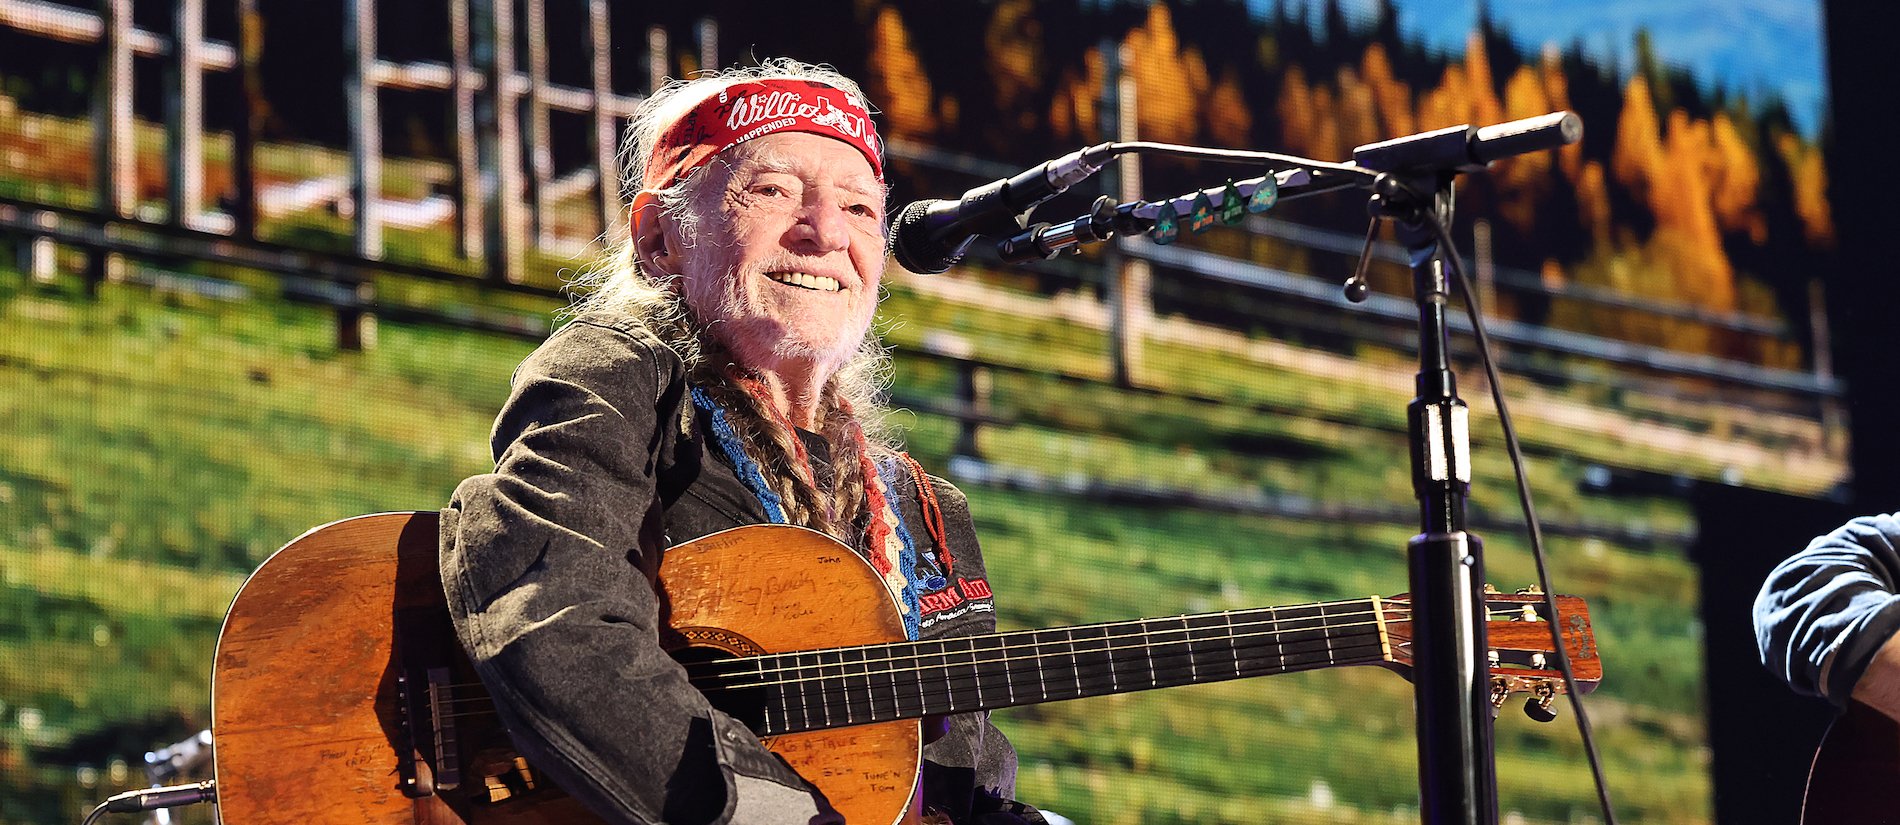 89YearOld Willie Nelson Is Up For 2023 Grammys, Not Oldest Nominee